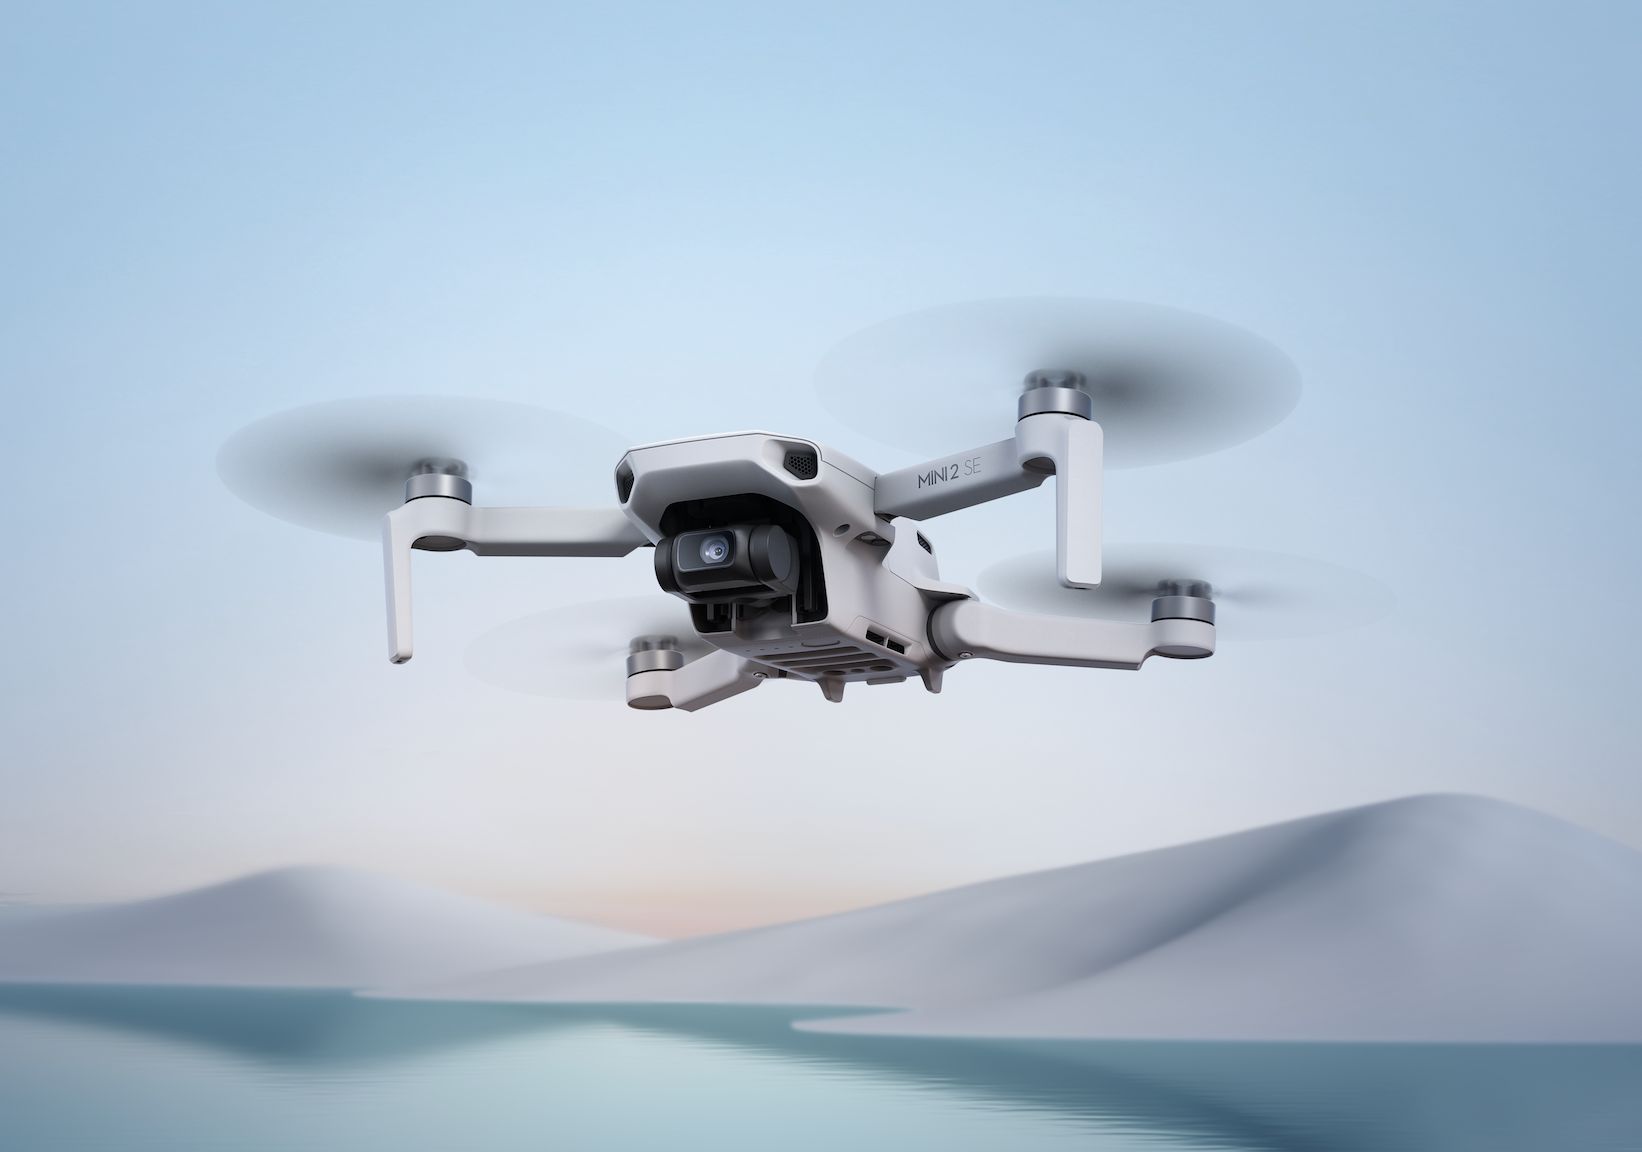 The Mini SE is DJI's cheapest, most compact 2021 drone yet -   News